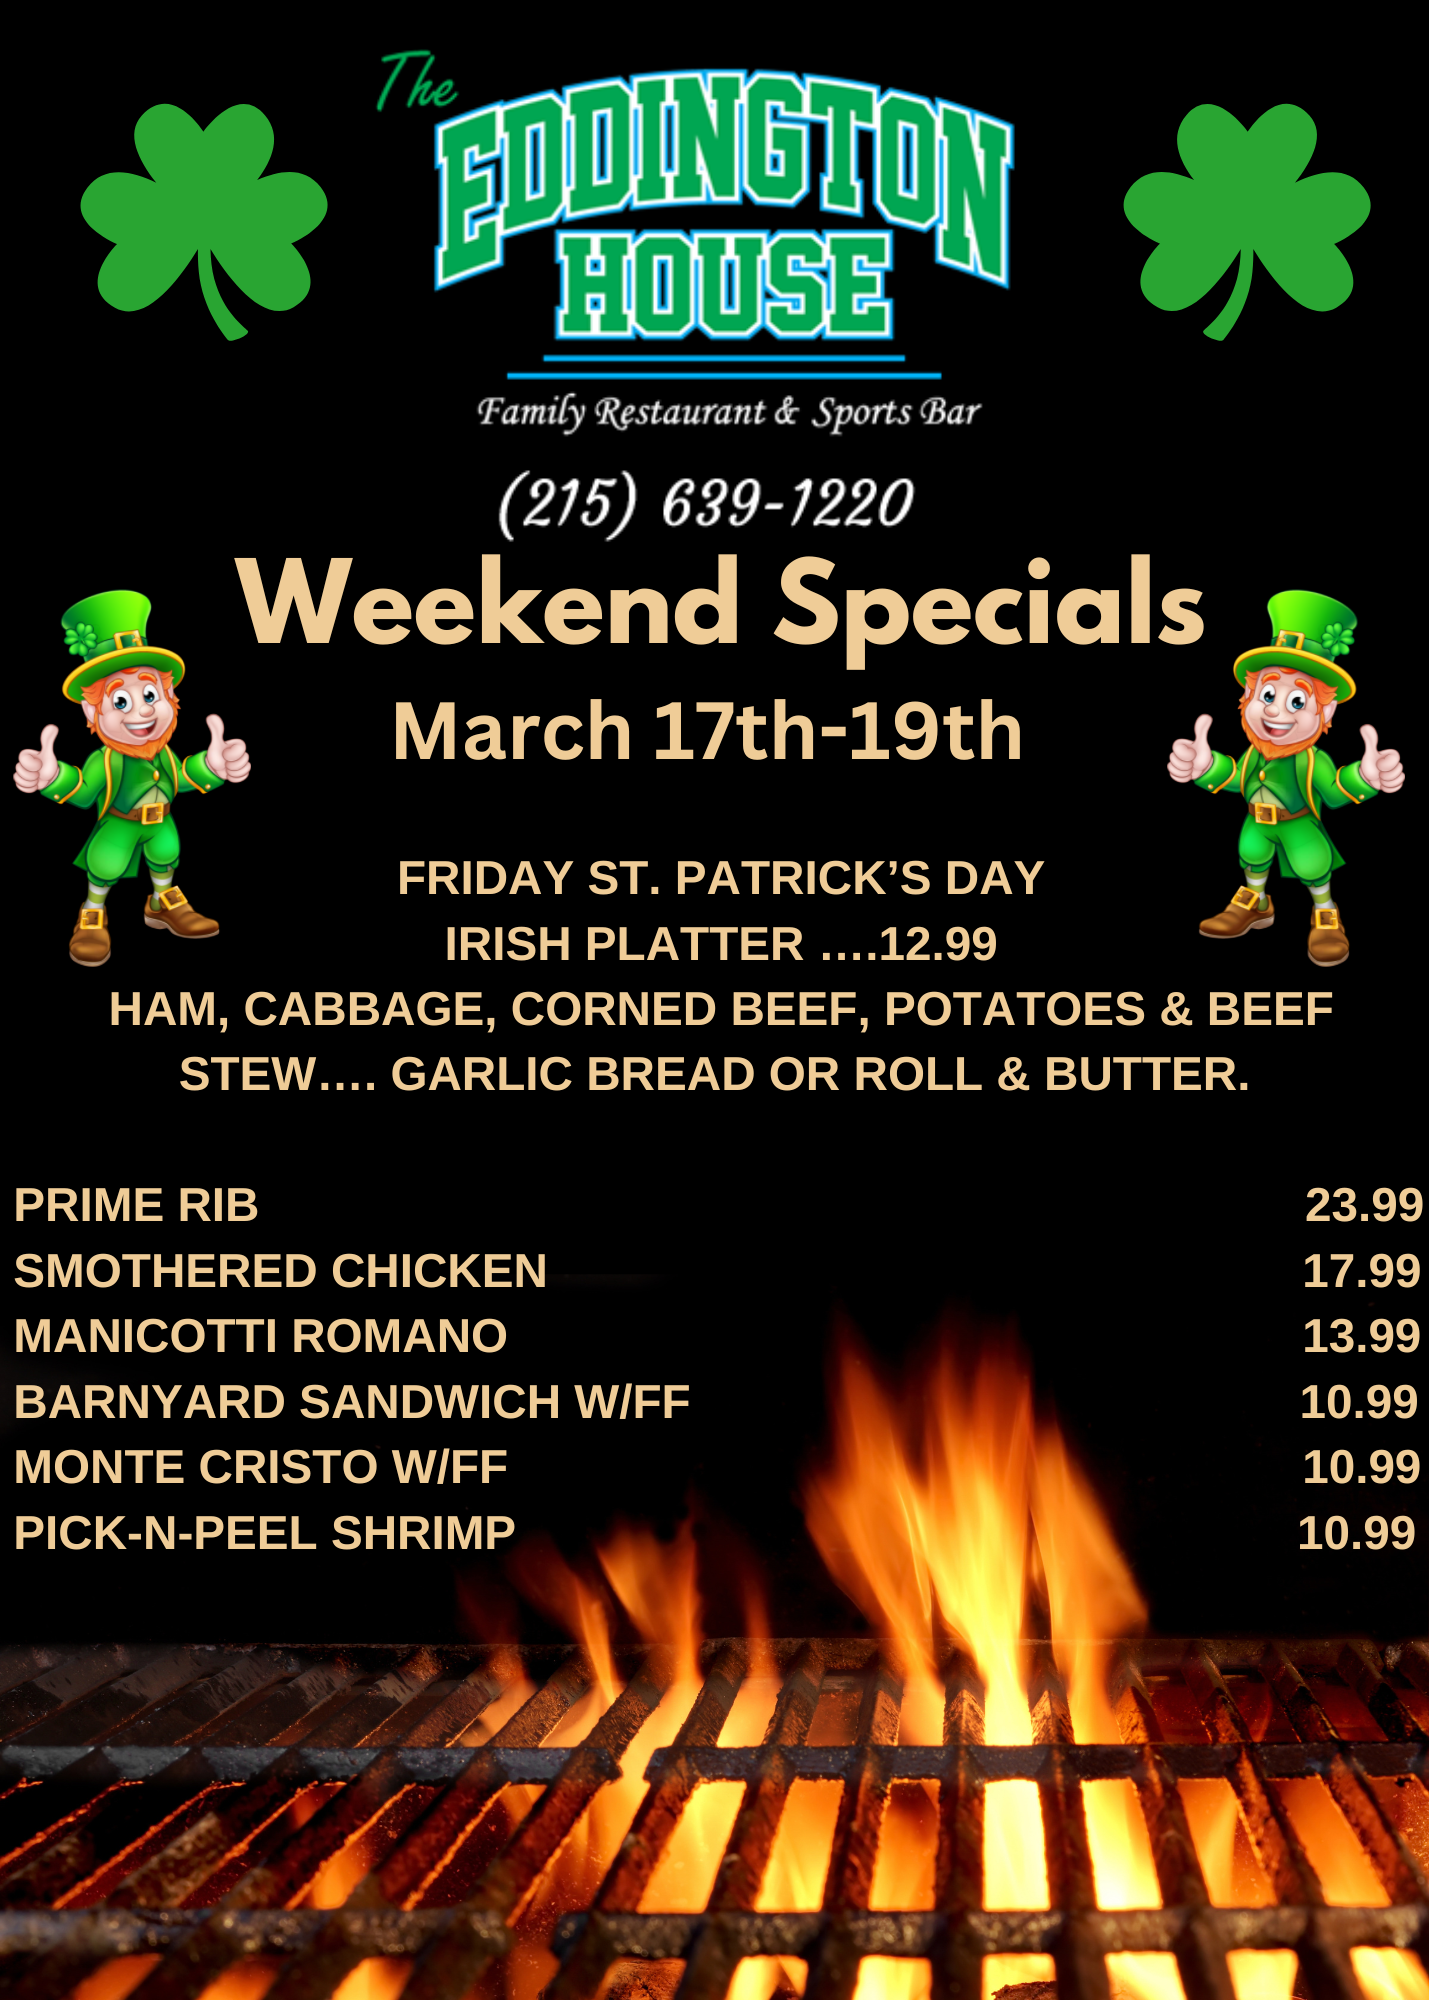 revised 3-17-23 EHouse Weekend Specials